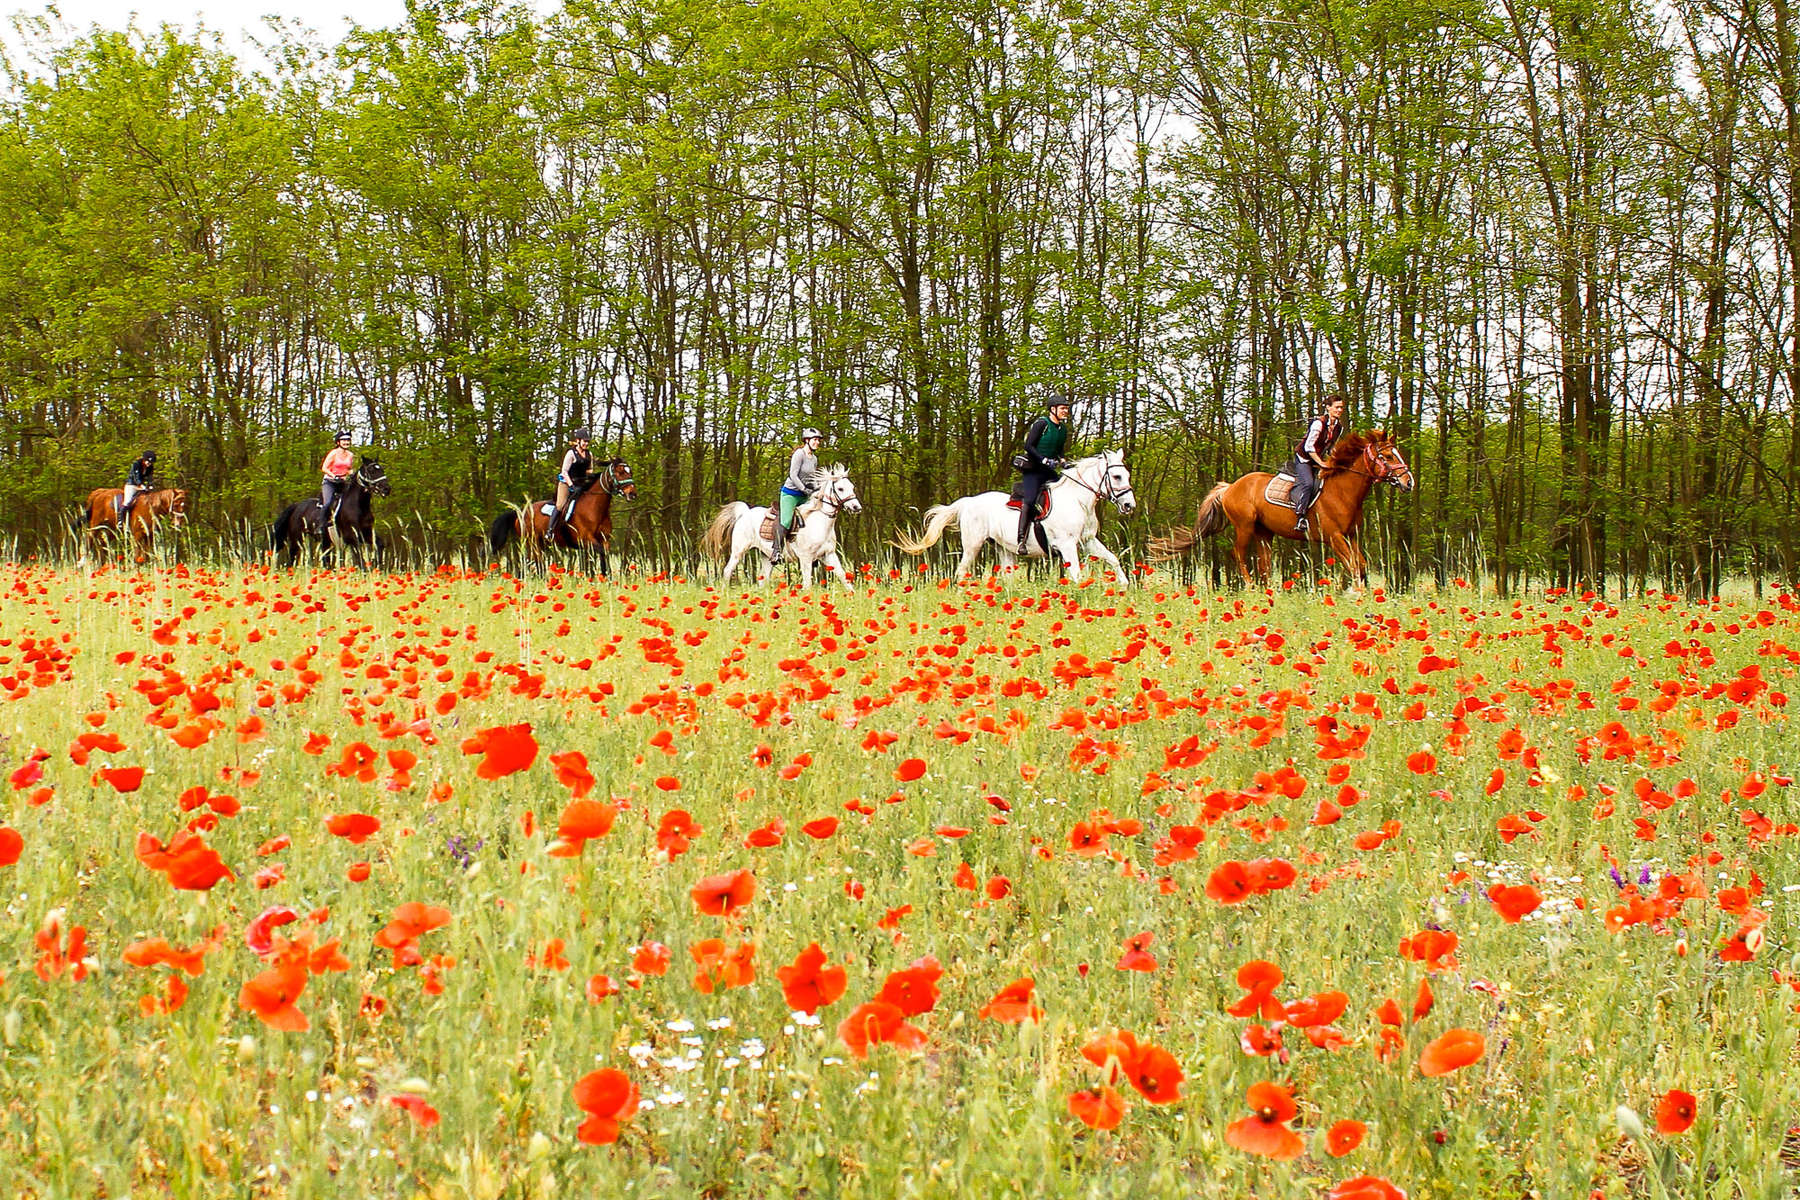 Riders cantering across a field of flowers in bloom